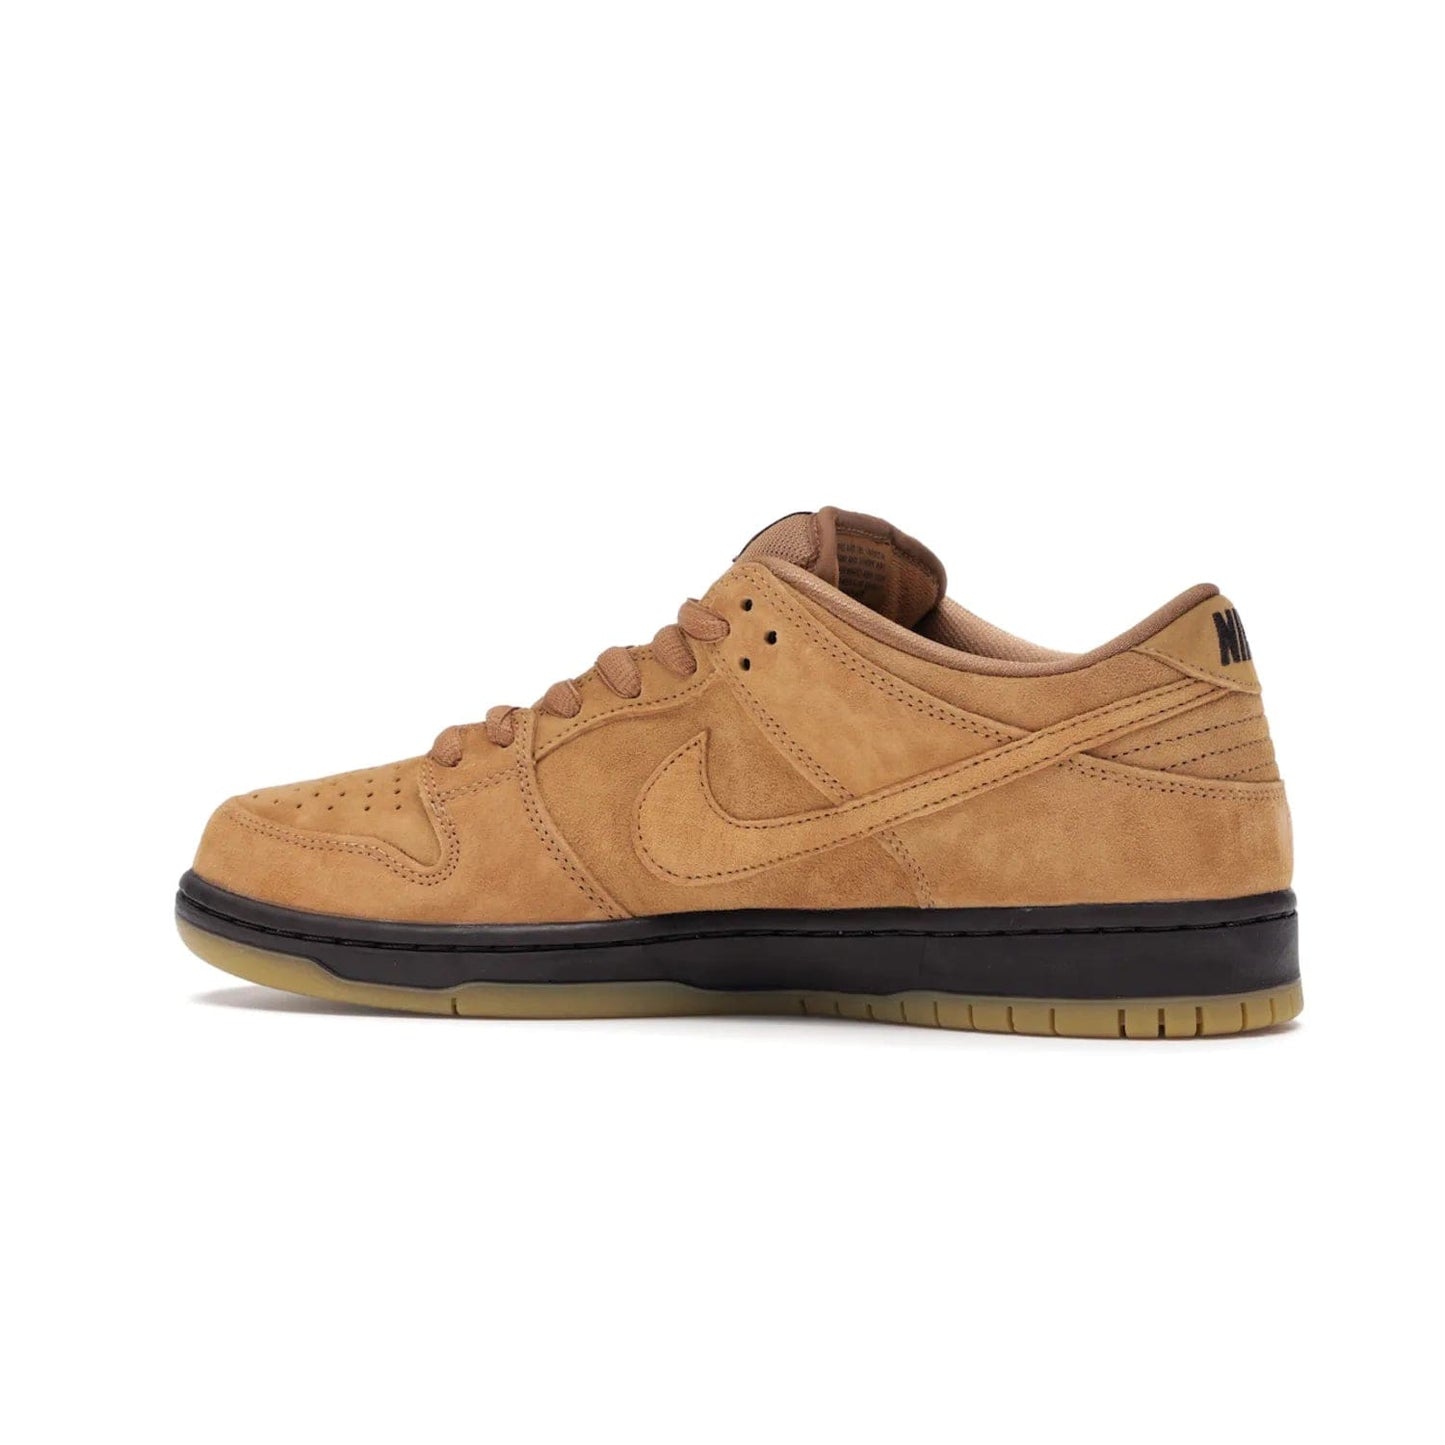 Nike SB Dunk Low Wheat (2021/2023) - Image 21 - Only at www.BallersClubKickz.com - The Nike SB Dunk Low Wheat (2021/2023)has a sleek silhouette and wheat suede upper. Tan tones for lining, mesh tongues, and laces. Iconic color palette midsole, perforated boxing toe. Brown branding on tongue and heel. Gum rubber outsole with partitioned pattern for traction. Eschewed in Feb 2021 for $110.